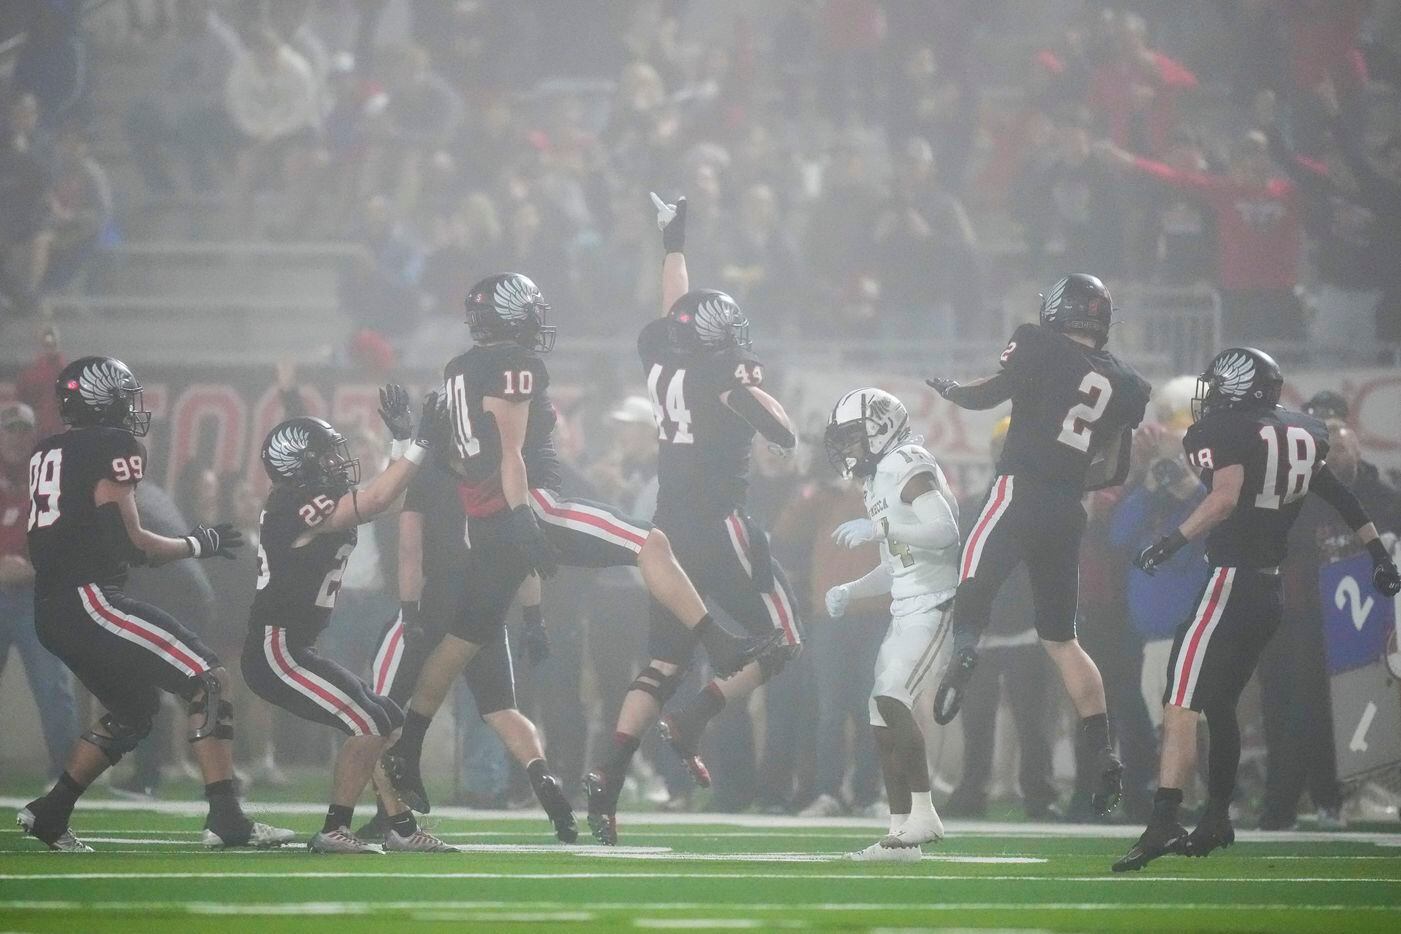 Argyle players celebrate an interception during the second half of a Class 5A Division II...